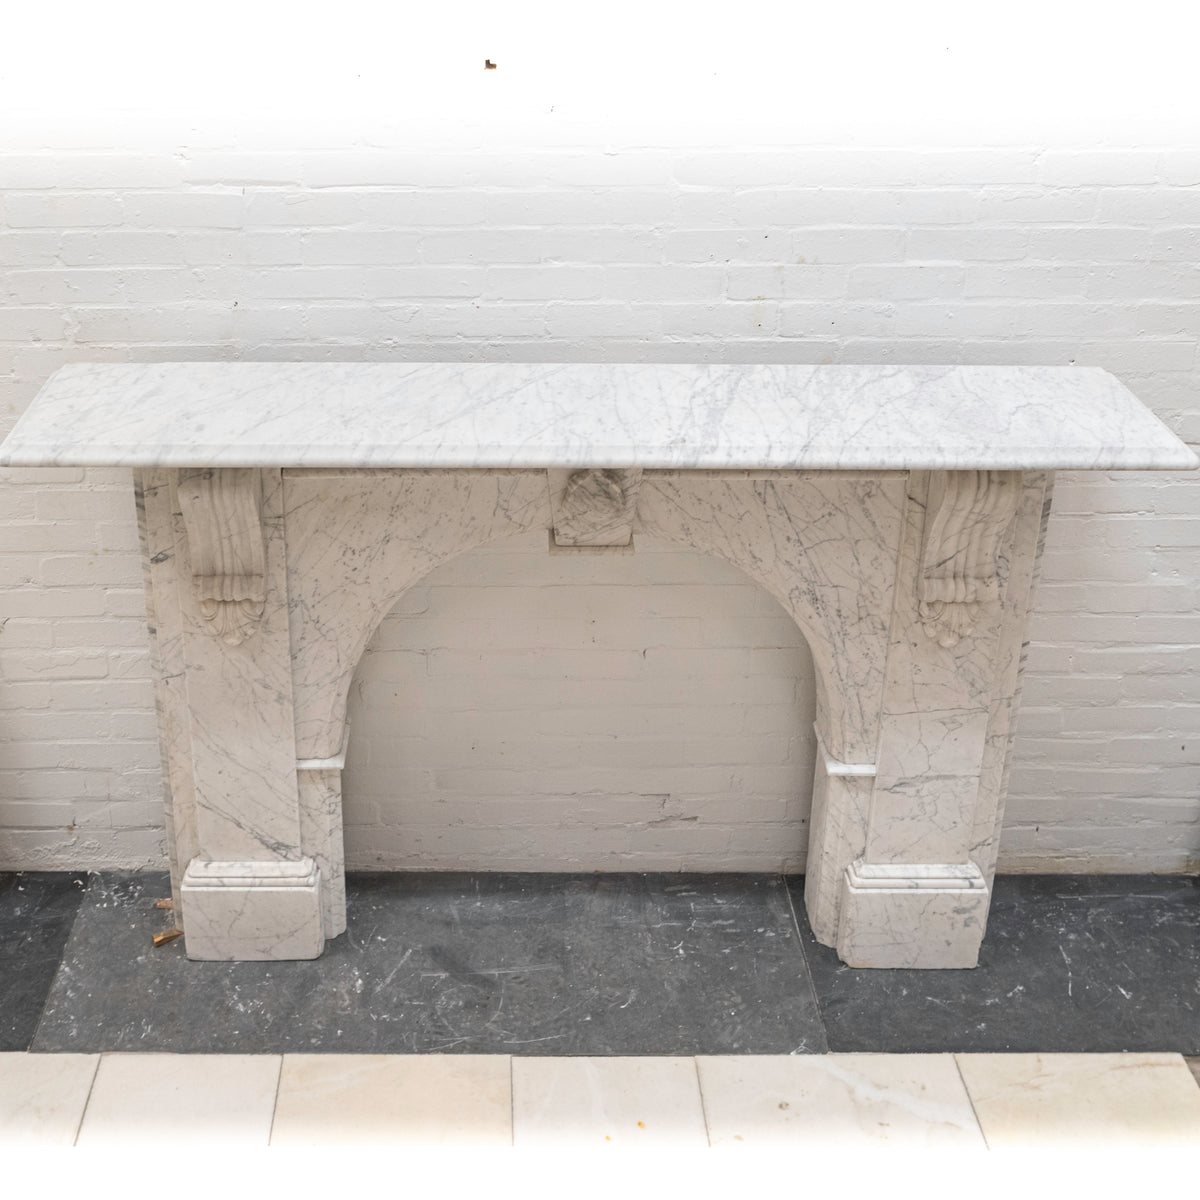 Large Antique Victorian Statuary Marble Arched Surround with Corbels | The Architectural Forum